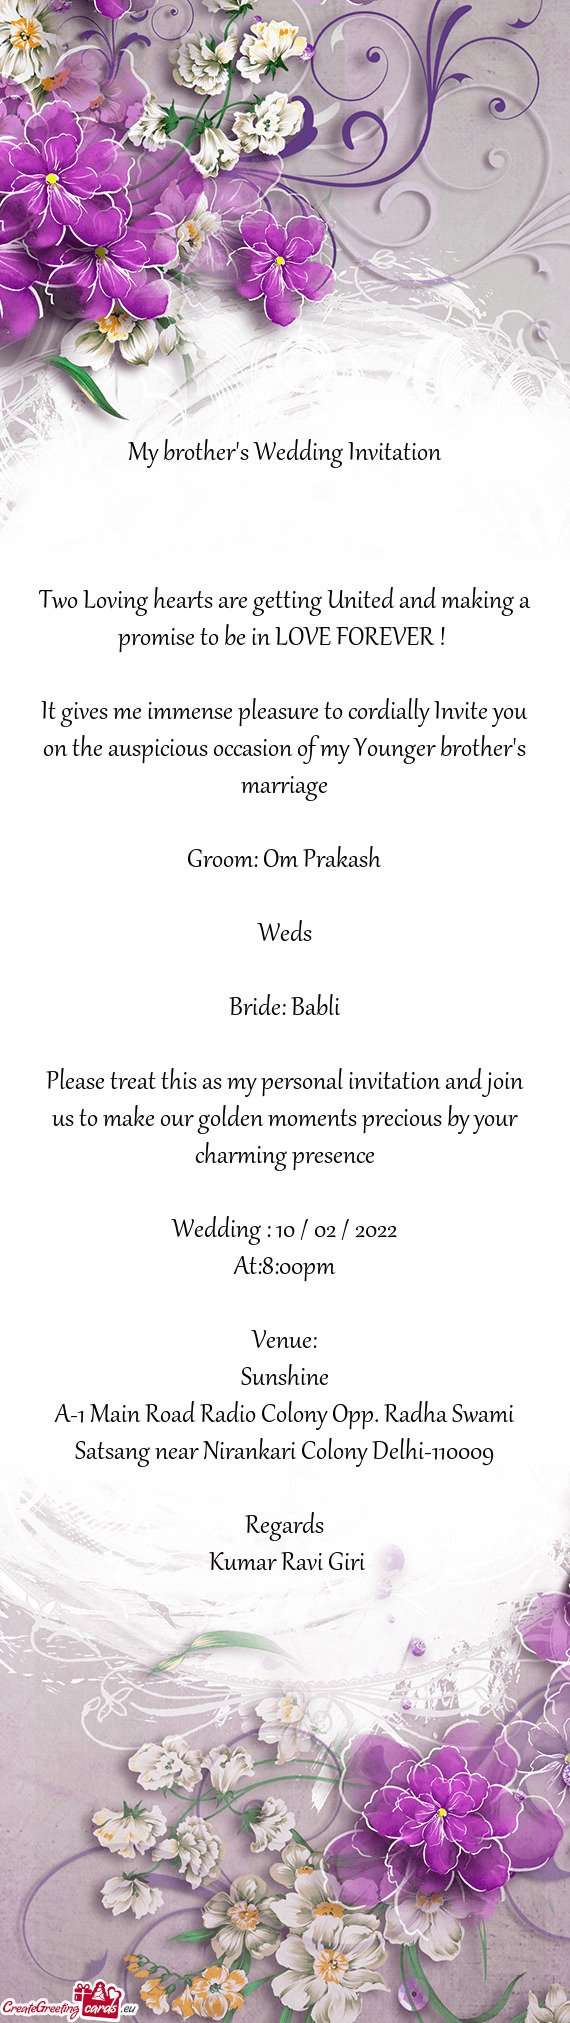 It gives me immense pleasure to cordially Invite you on the auspicious occasion of my Younger brothe